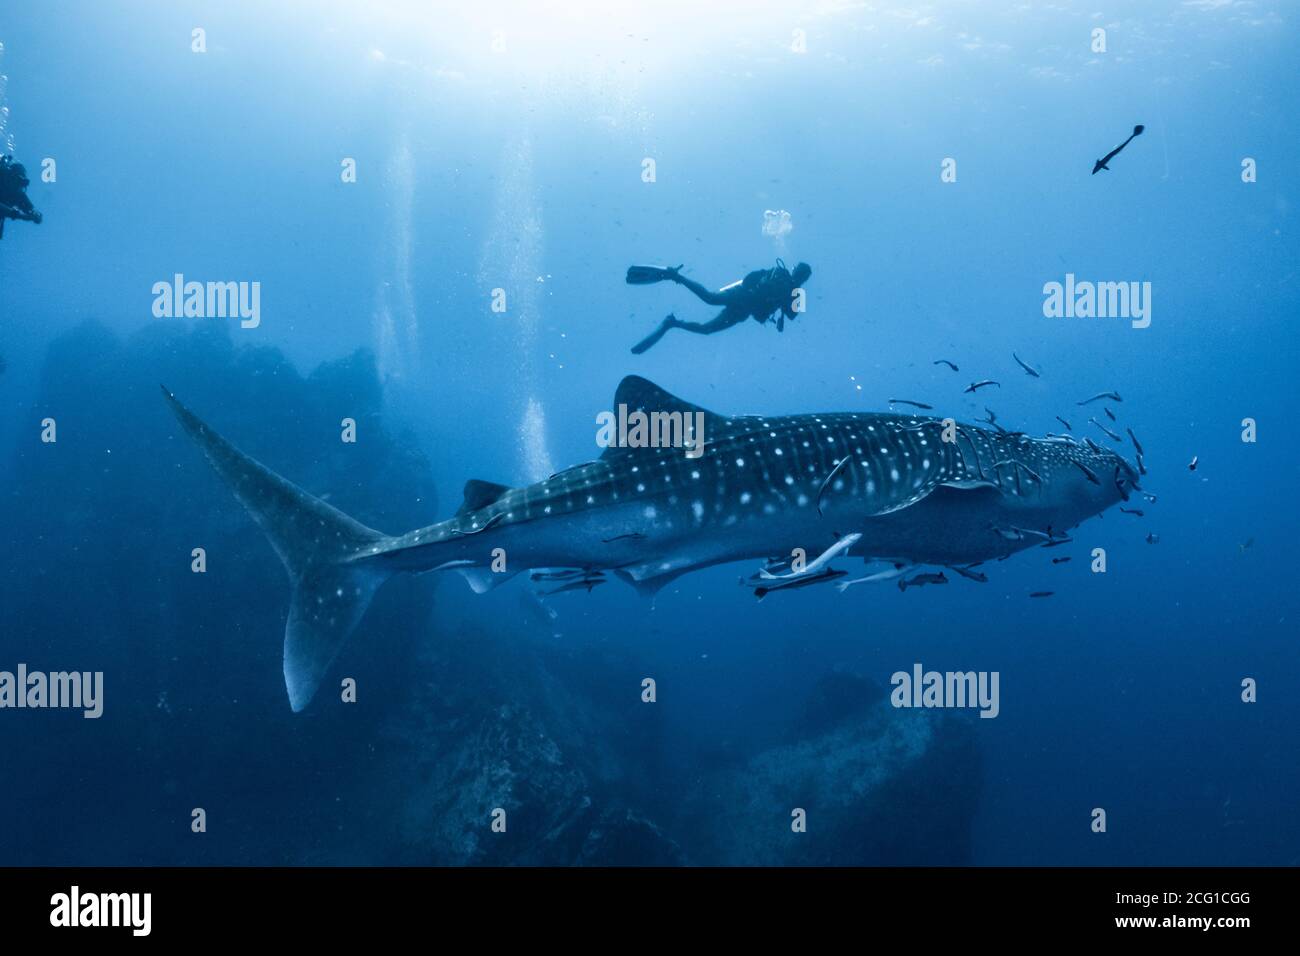 giant Whale shark swimming underwater with scuba divers Stock Photo